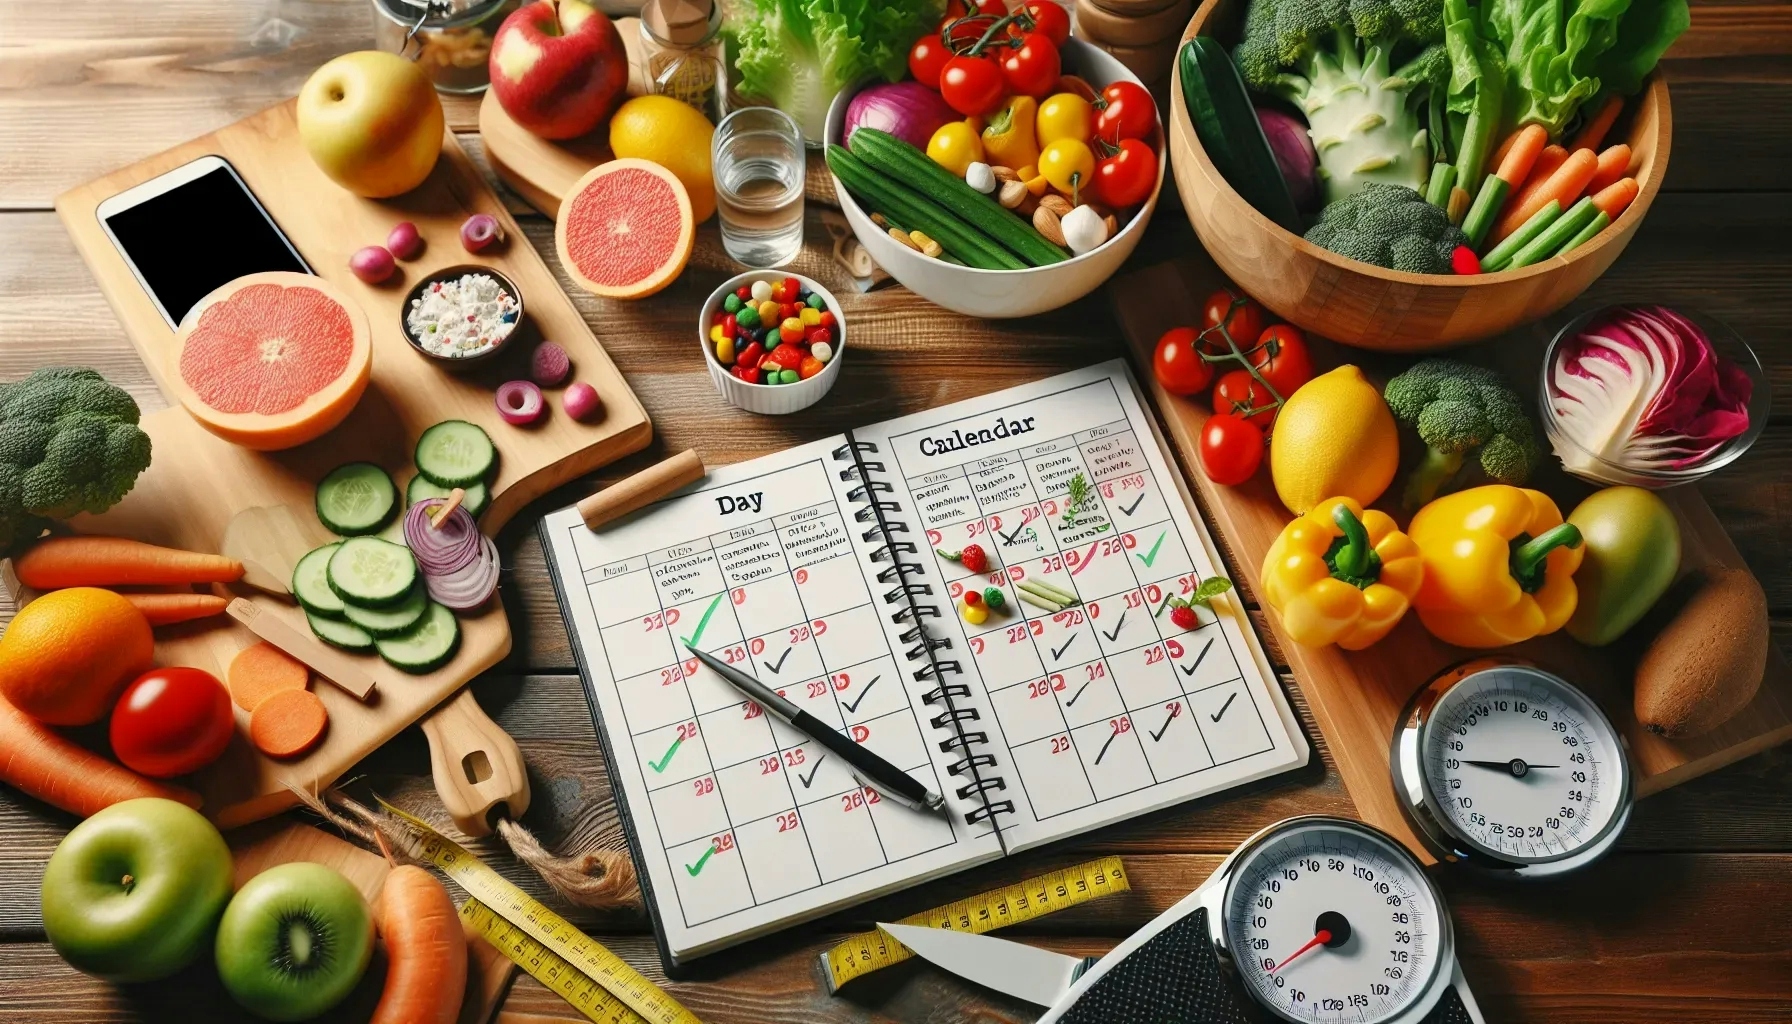 Can you provide an example of how you've helped a client with meal planning to meet their weight loss goals?